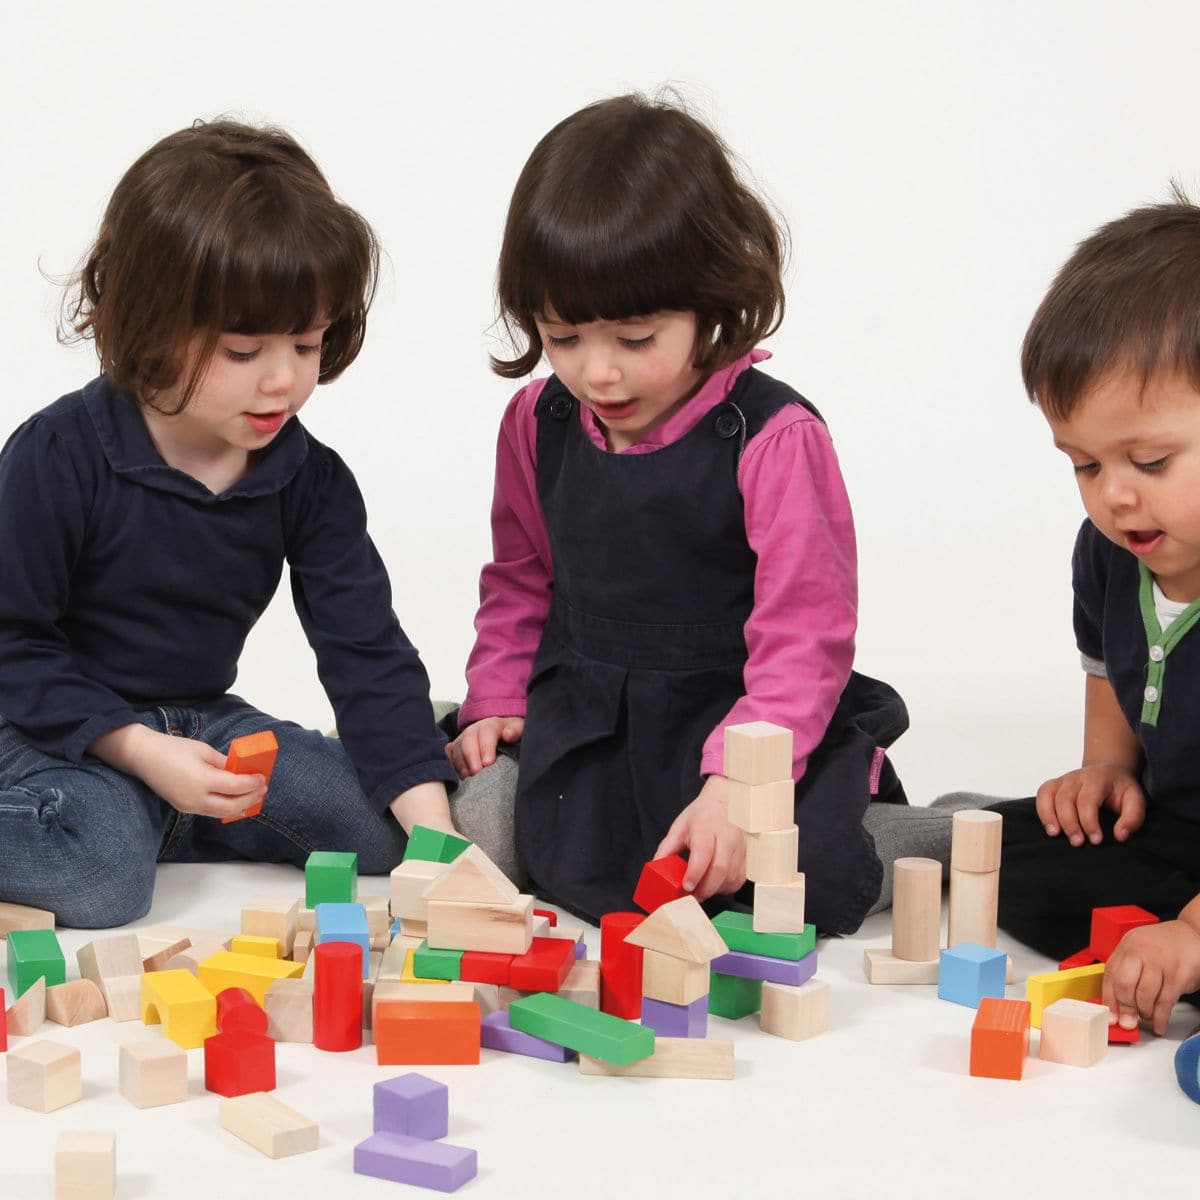 80 Wooden Blocks, The 80-piece wooden building block set offers a comprehensive playtime experience for children, focusing not just on entertainment but also on developmental benefits. Below is an overview of its features and the advantages they bring: Features Large Set: The set contains 80 wooden blocks, offering an ample number of pieces for individual or shared play. Variety in Shape and Colour: The blocks come in various shapes and colours, adding an element of visual interest and educational value. Ch